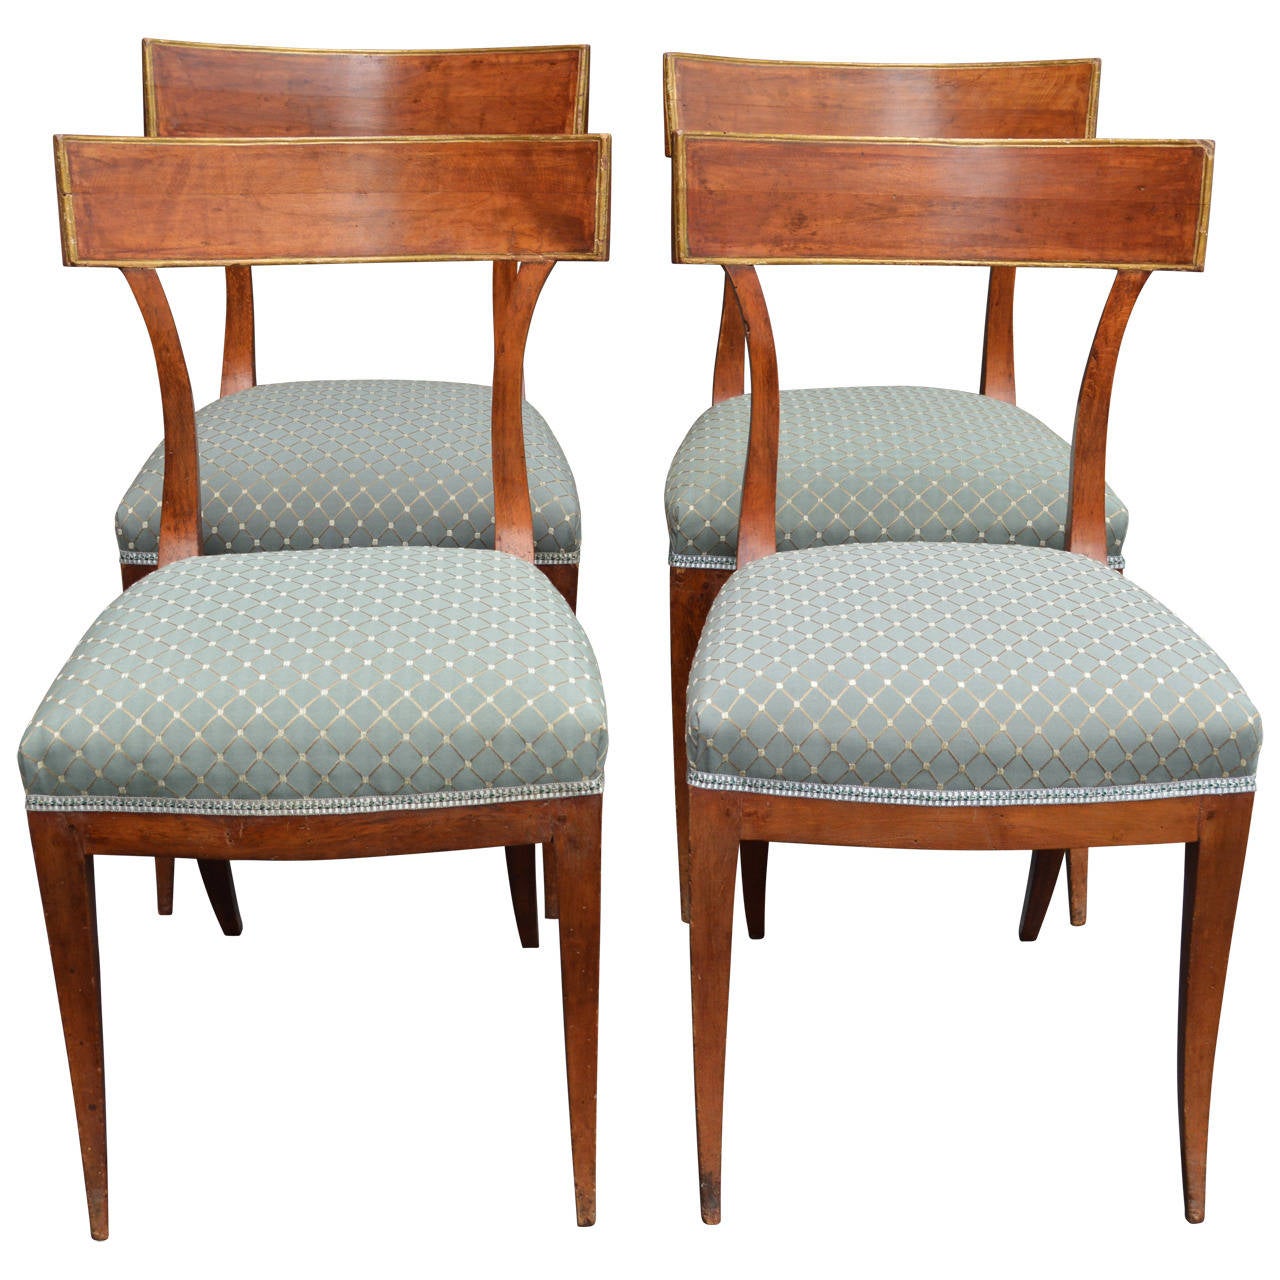 Stunning set of four Directoire style curved back walnut chairs with gilded gold detailing. Newly upholstered in a teal embossed diamond pattern rayon/poly blend.